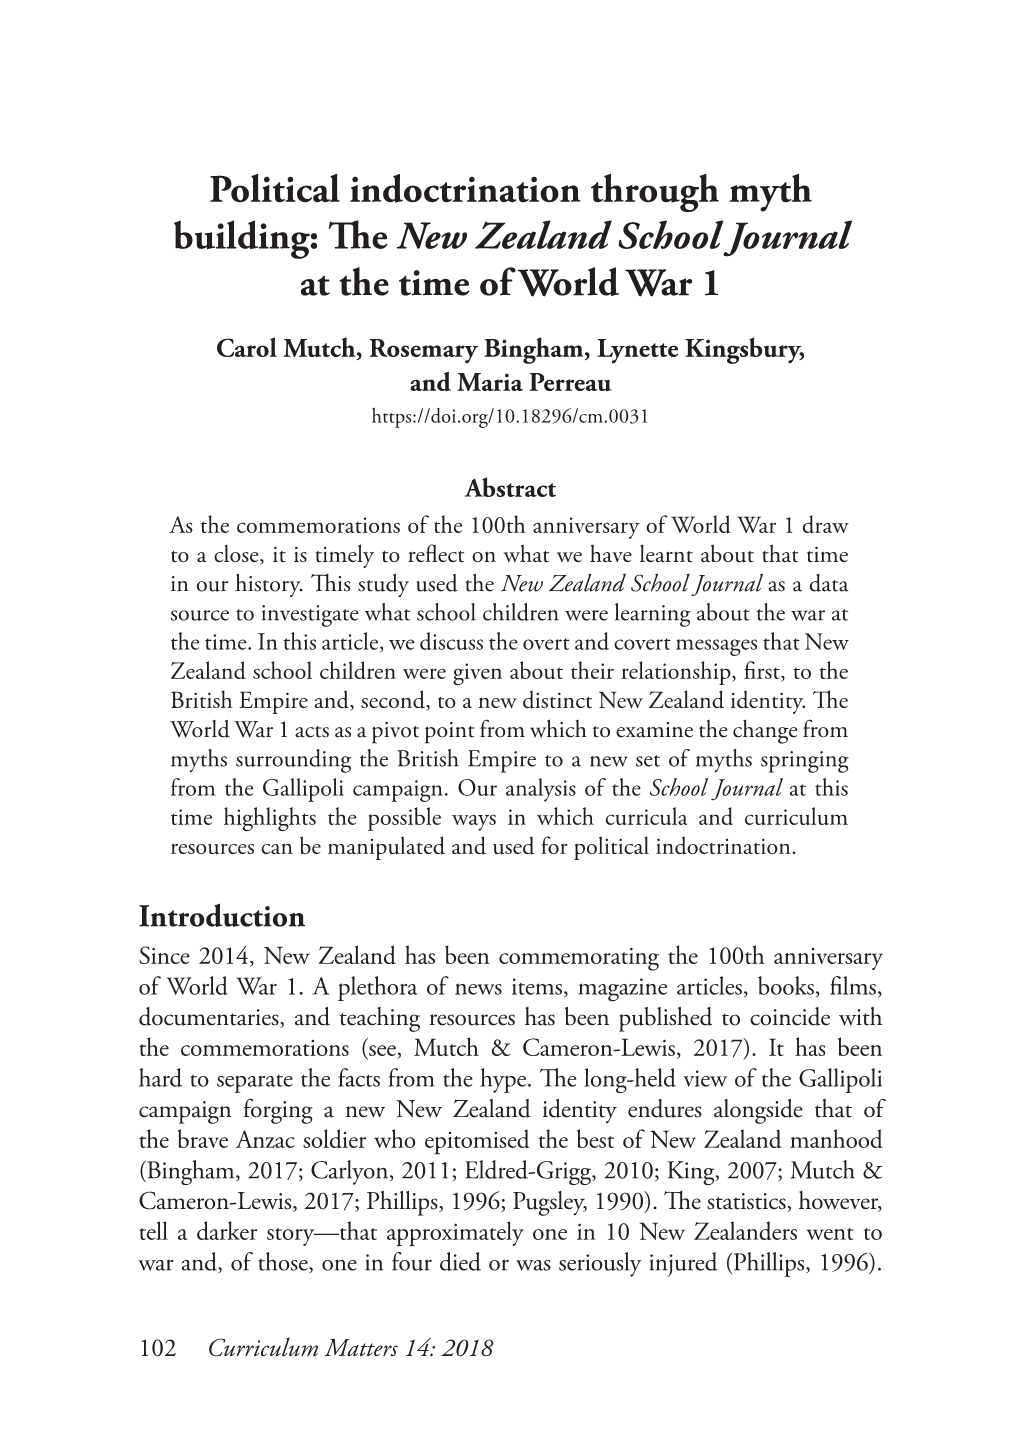 The New Zealand School Journal at the Time of World War 1